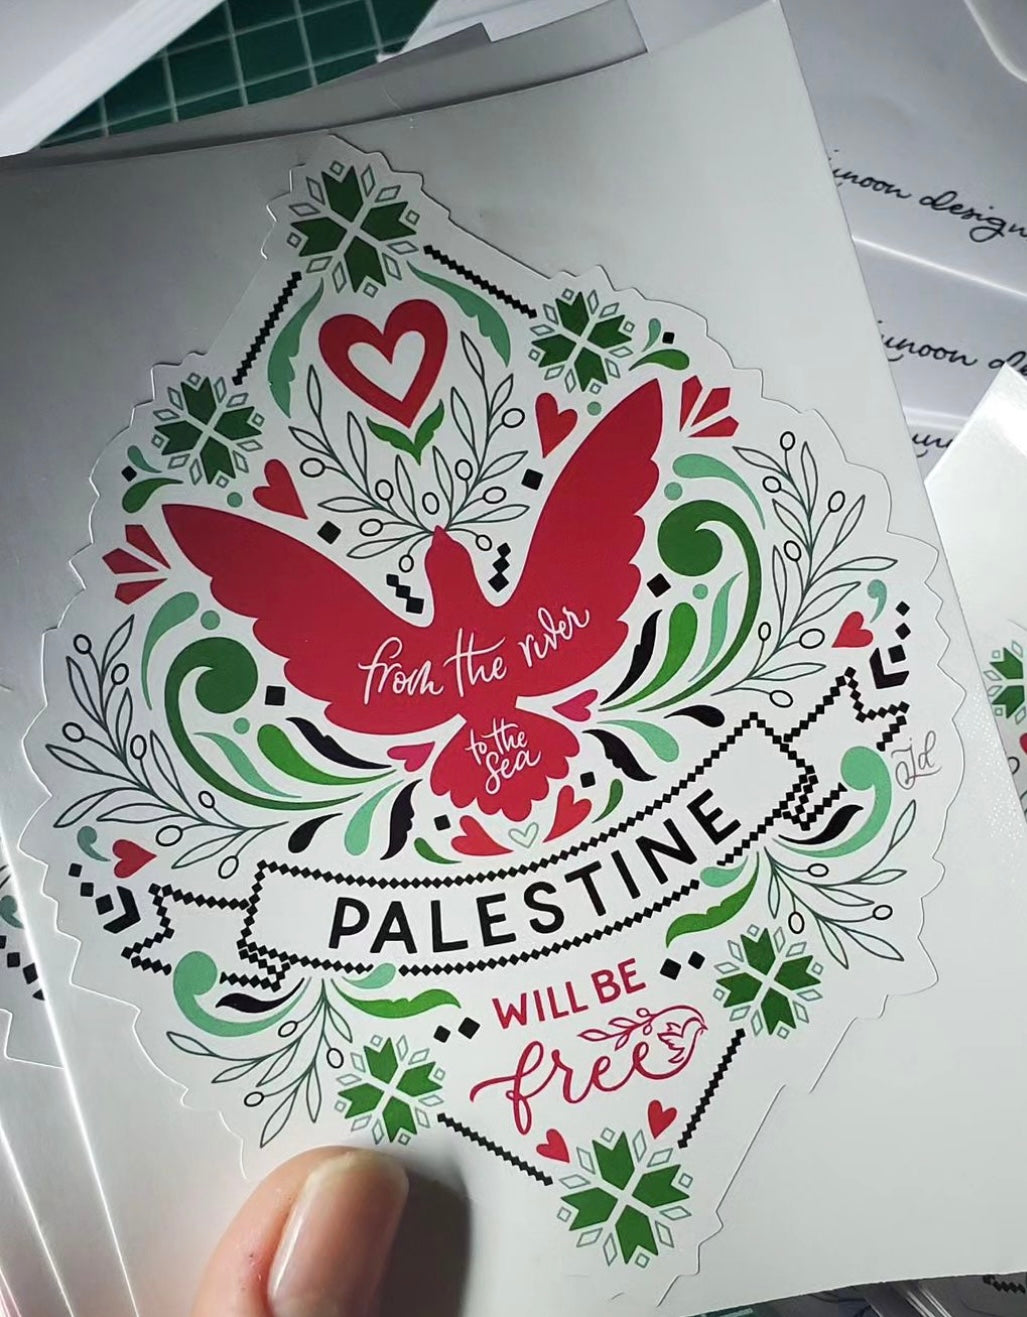 From the river to the sea - Palestine Laptop Sticker by Junoon Designs (Barbados) (6”x7”)